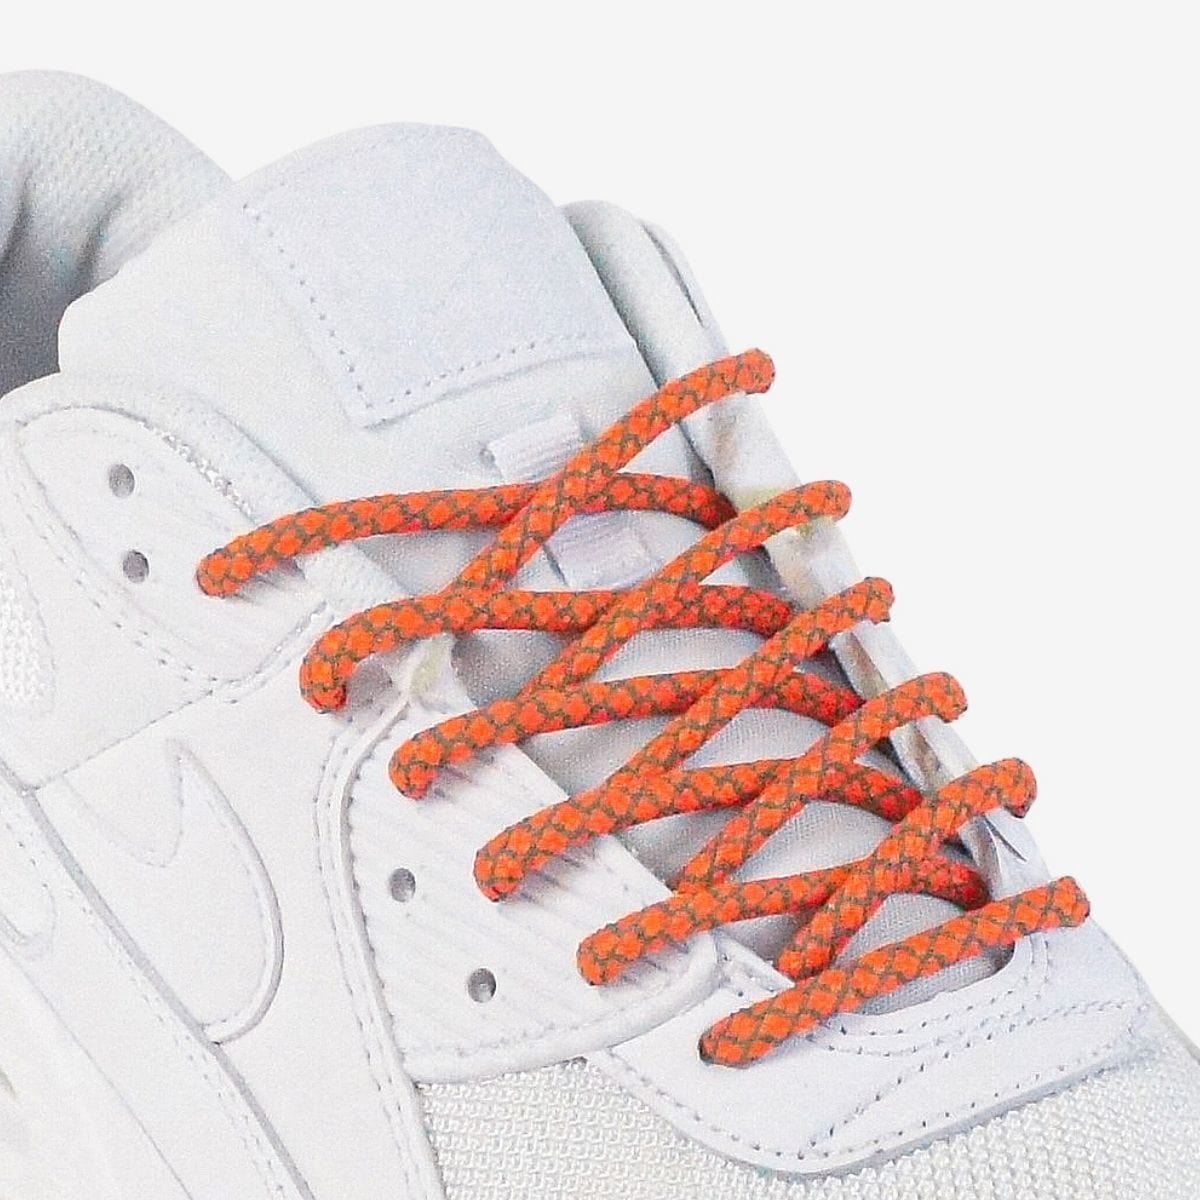 custom-color-shoelaces-on-white-sneakers-with-reflective-orange-laces